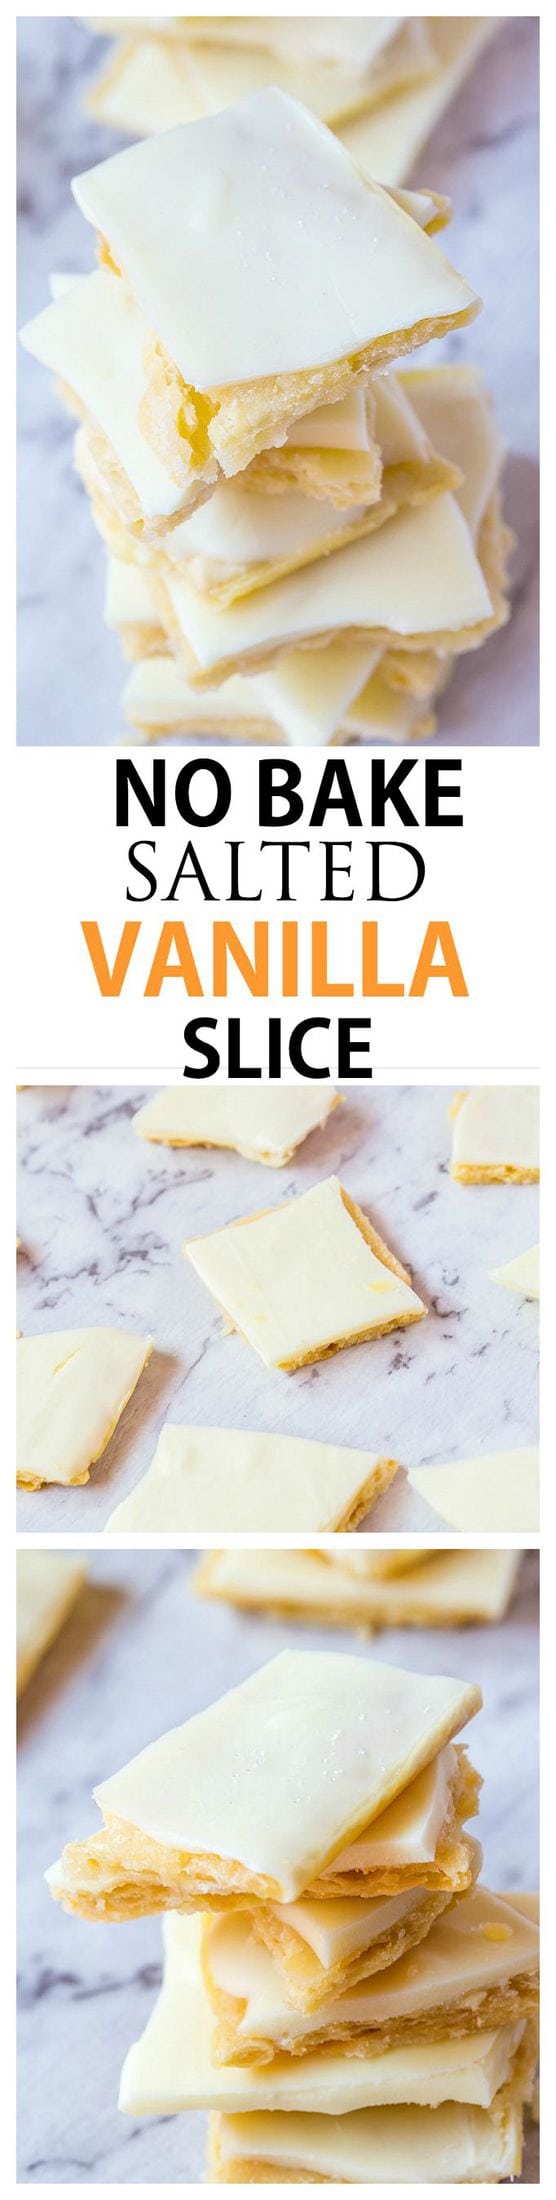 Healthy {3 INGREDIENT} No Bake Salted Vanilla Slice- One recipe. Three ways. This Healthy No Bake Salted Vanilla Slice requires just THREE ingredients to whip up and depending on which method you choose, can be vegan, gluten free and refined sugar free! If all else fails, try the fool proof version!  